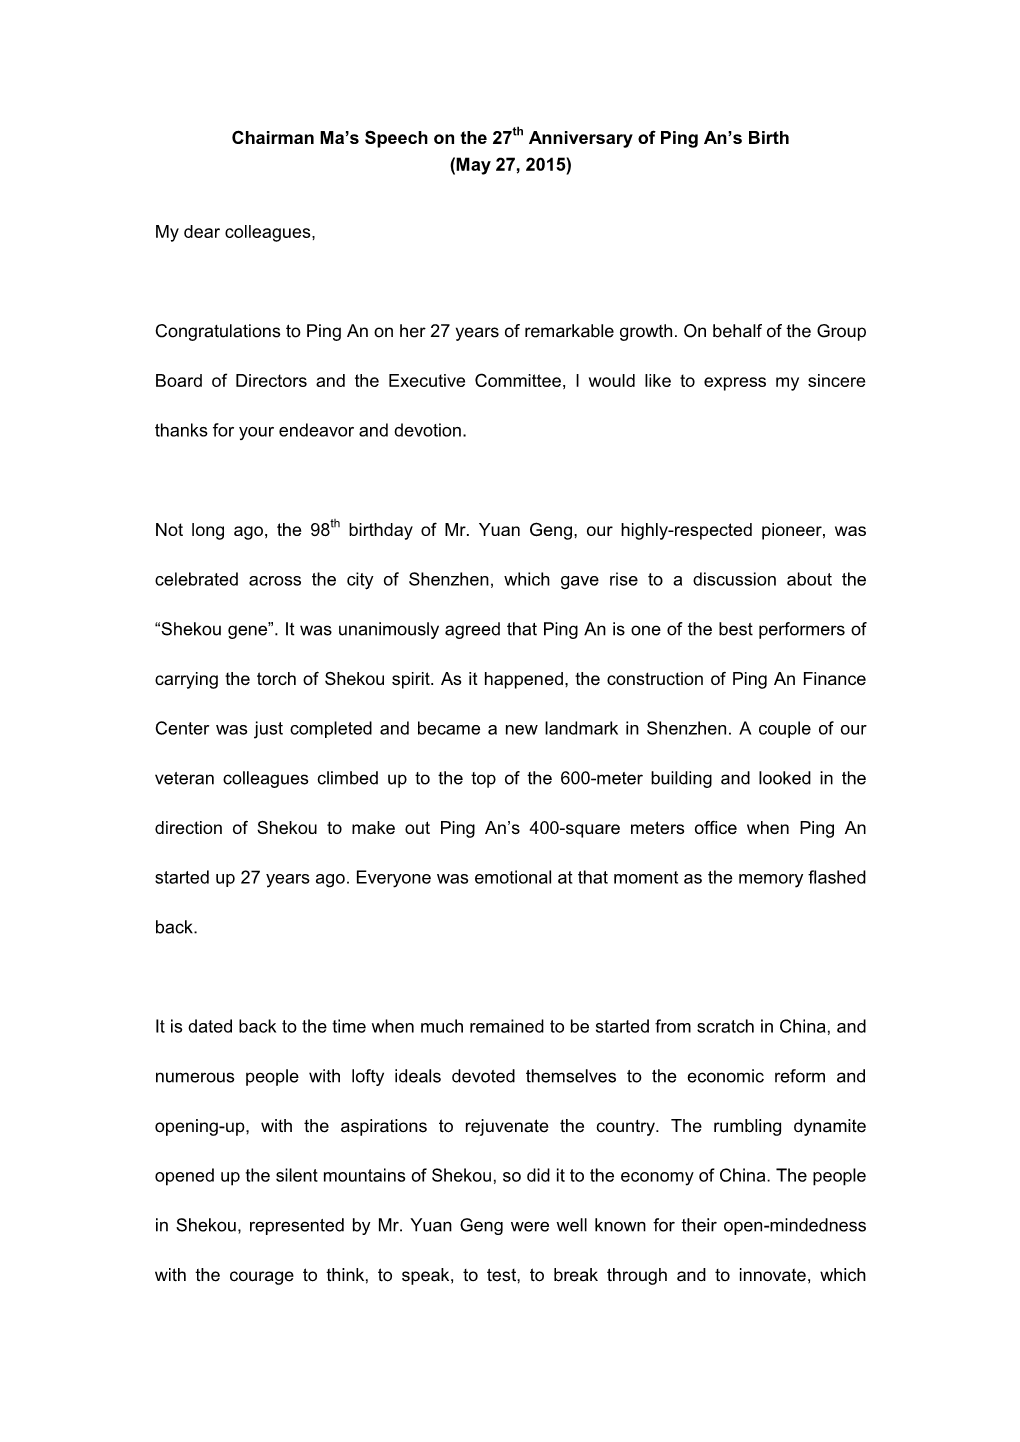 Chairman Ma's Speech on the 27Th Anniversary of Ping An's Birth (May 27, 2015) My Dear Colleagues, Congratulations to Ping A